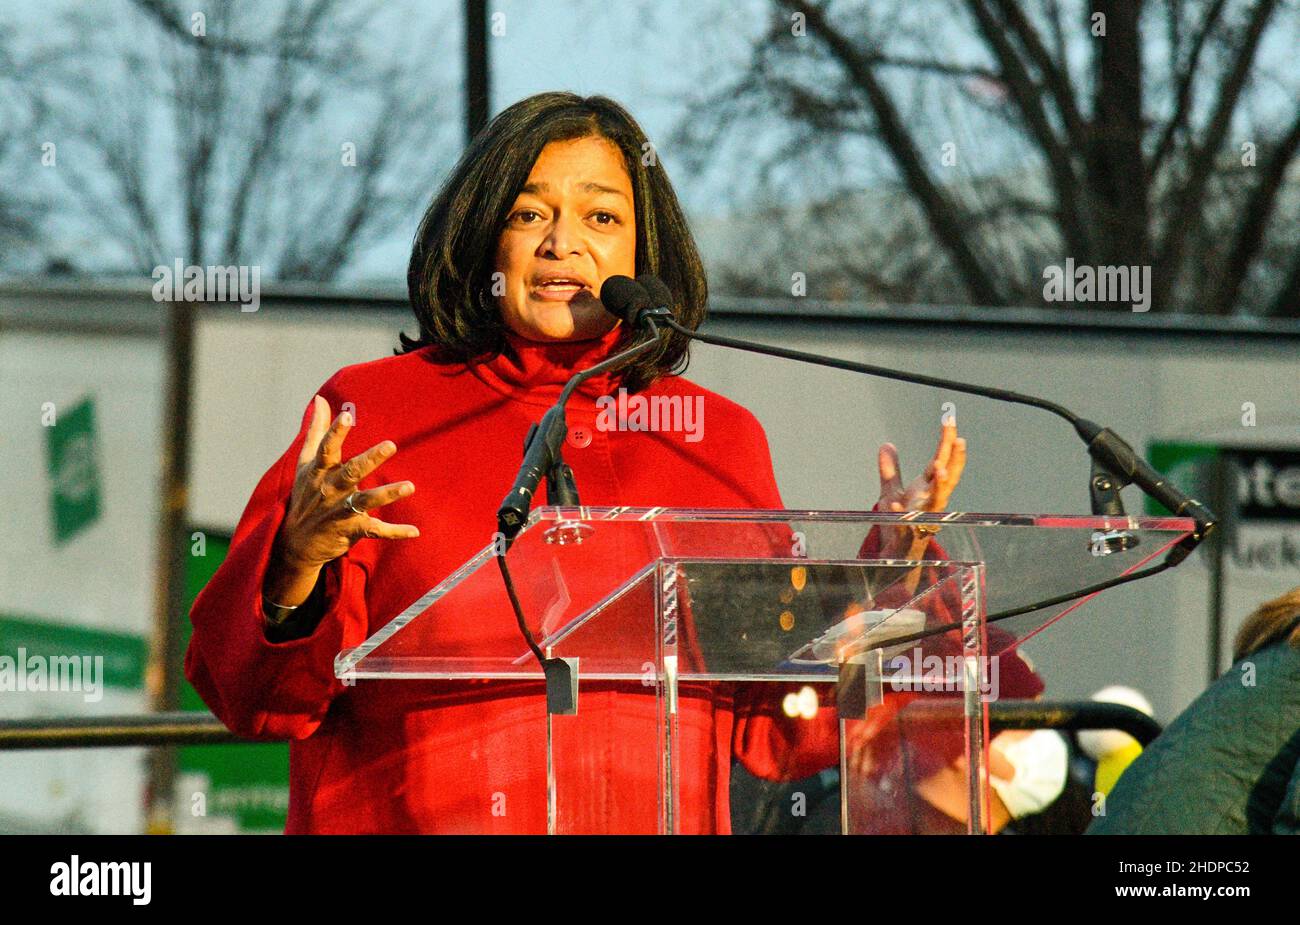 Washington, USA. 06th Jan, 2022. U.S. Representative Pramila Jayapal speaks at a vigil to honor those lost on January 6, 2021 during the storming of the U.S. Capitol and protest for greater voter protections on the National Mall in Washington, DC on January 6, 2022. (Photo by Matthew Rodier/Sipa USA) Credit: Sipa USA/Alamy Live News Stock Photo